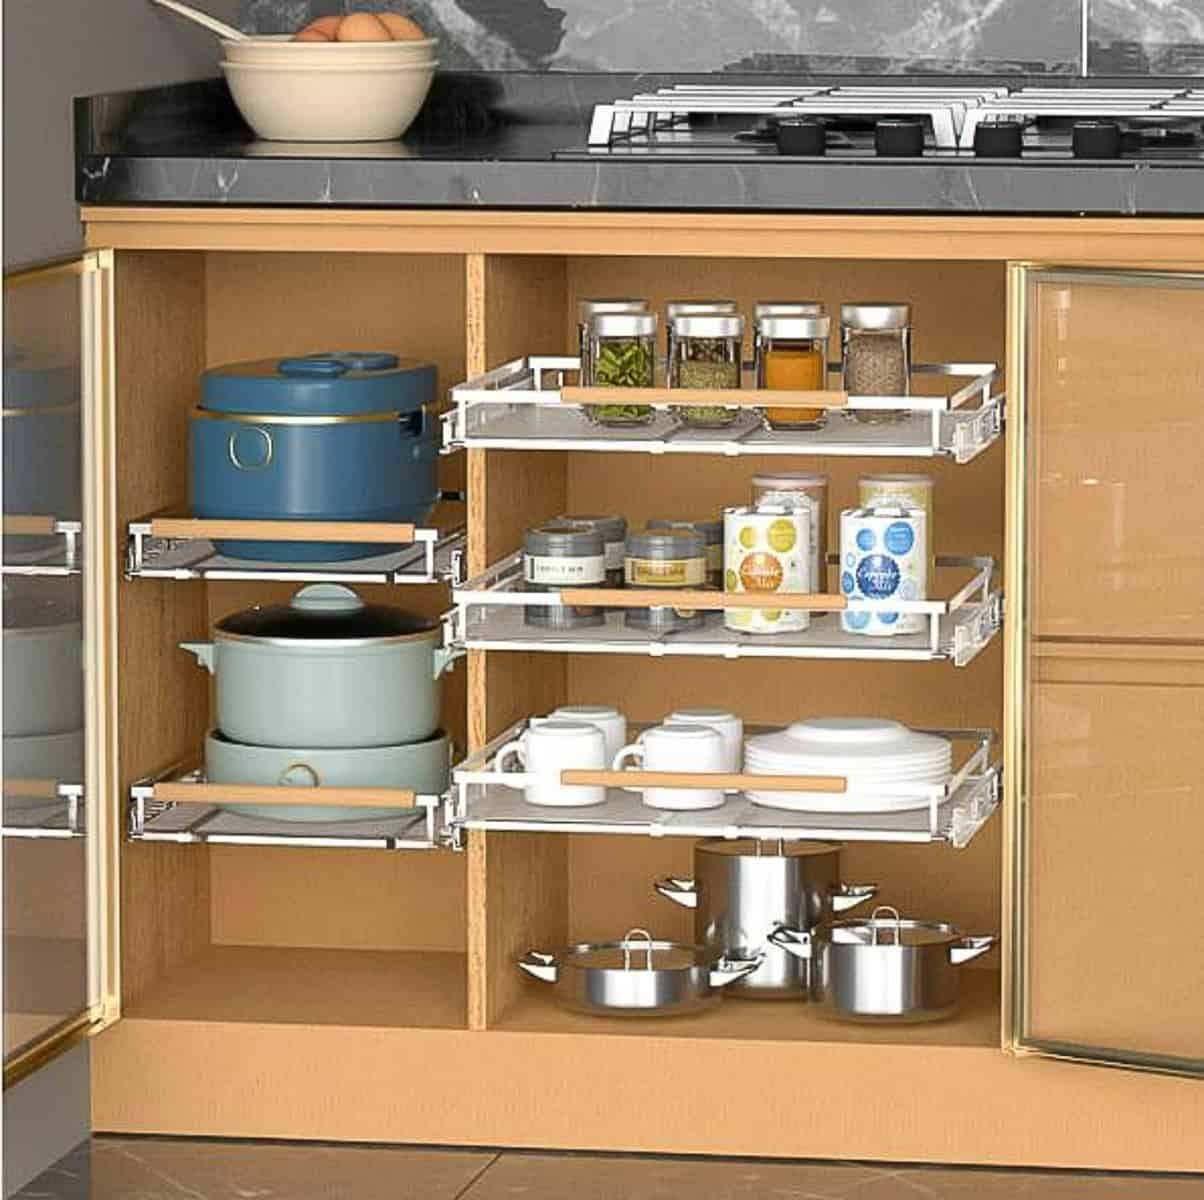 pull-ou storage system inside light wood toned kitchen cabinets